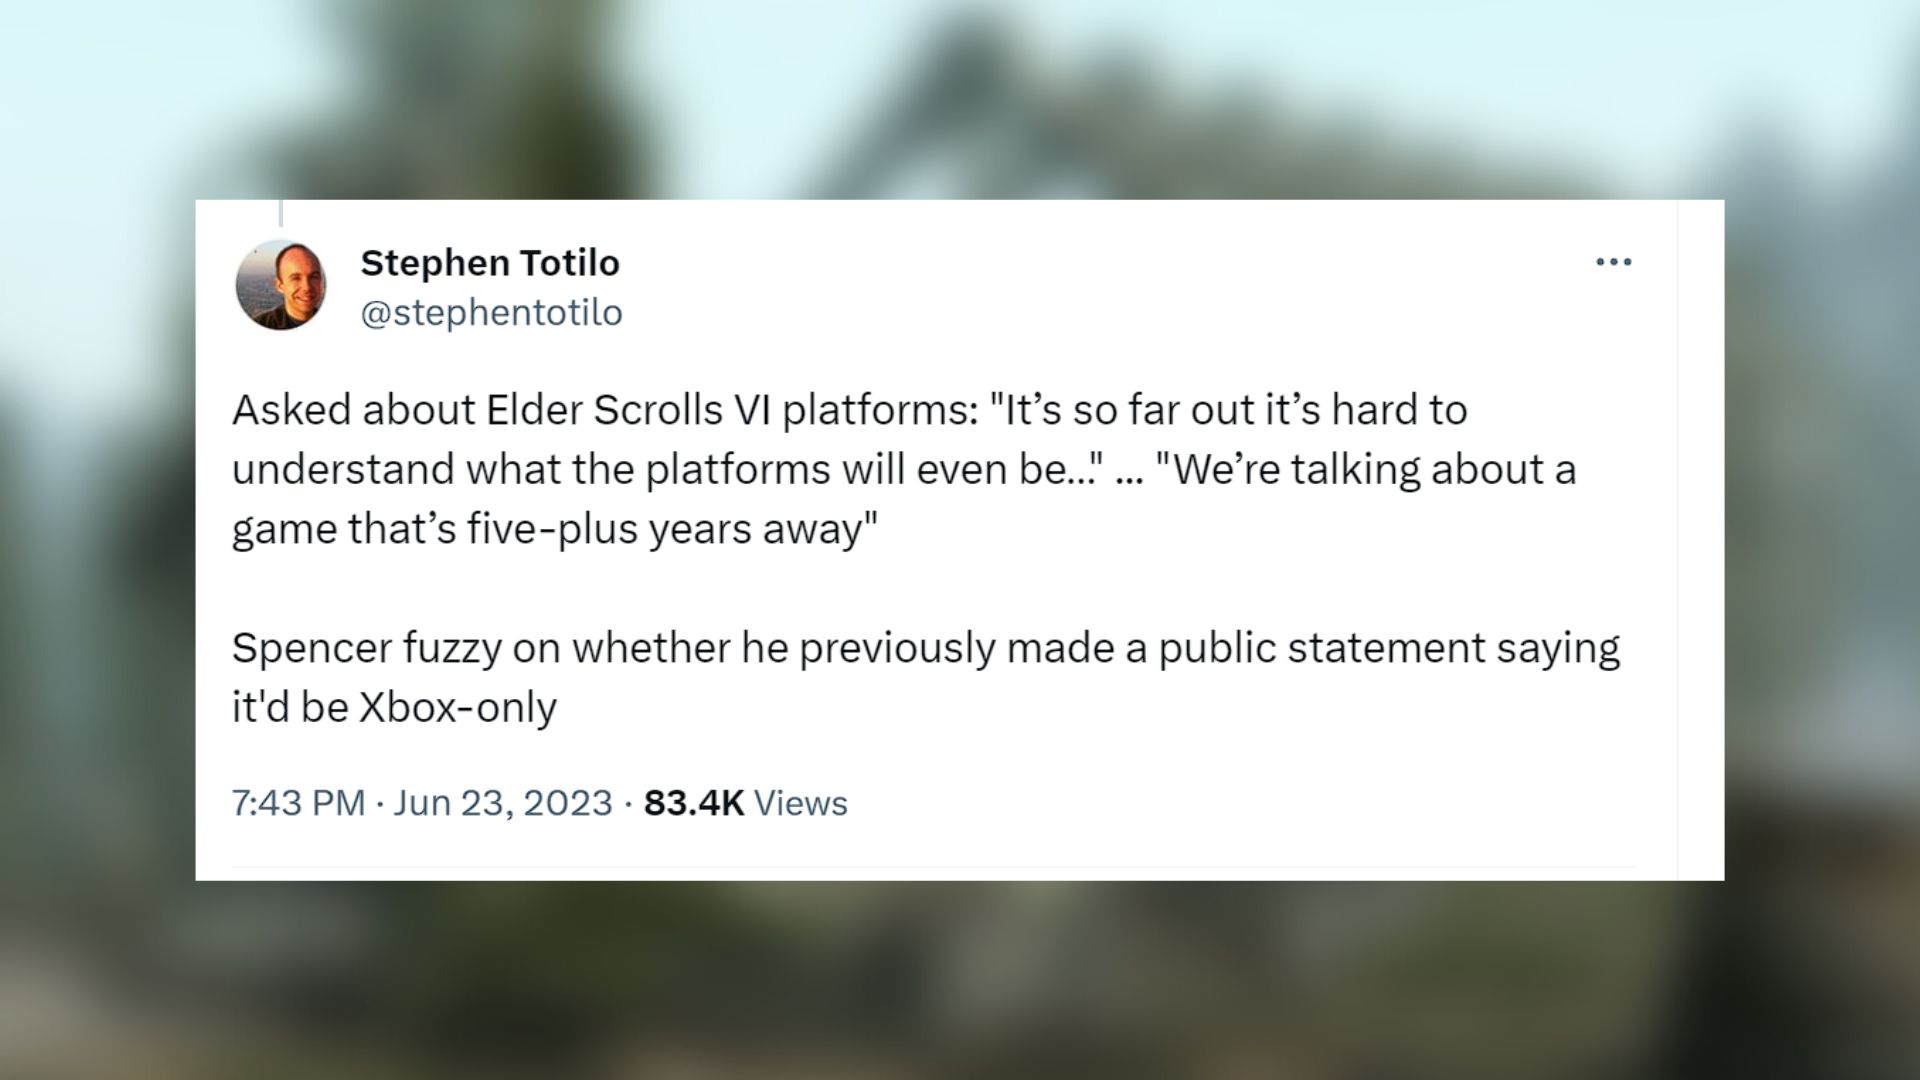 The Elder Scrolls 6 Director Has Some Good News for Fans